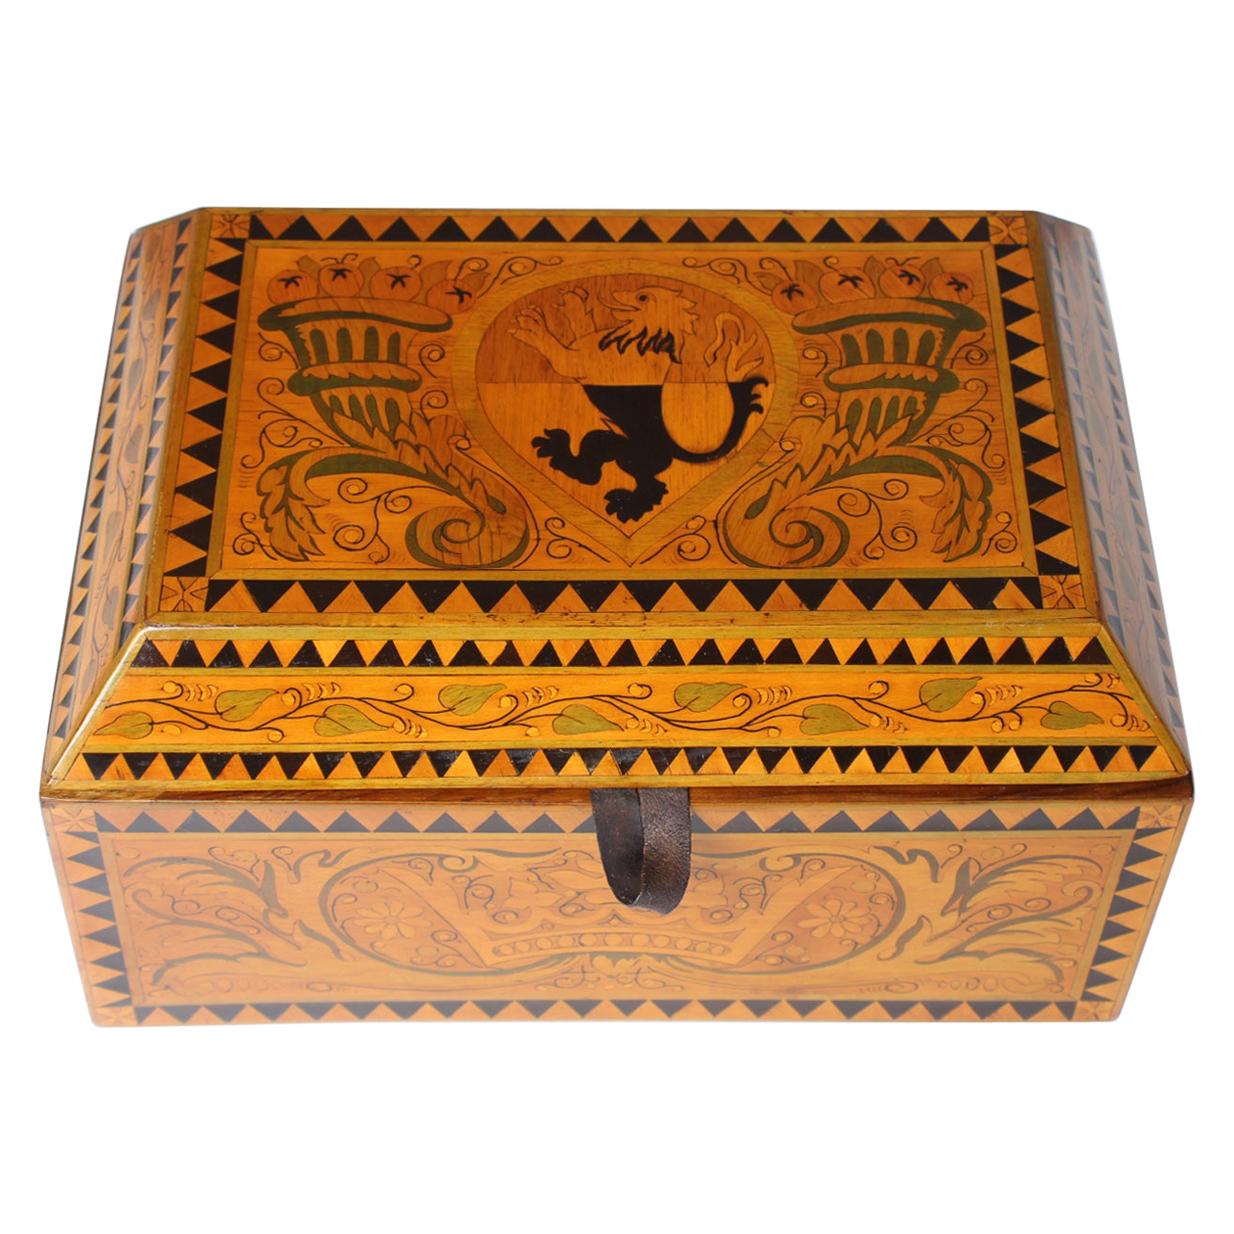 Inlaid Jewelry or Cigar Wooden Box, Marquetry, Germany, circa 1900